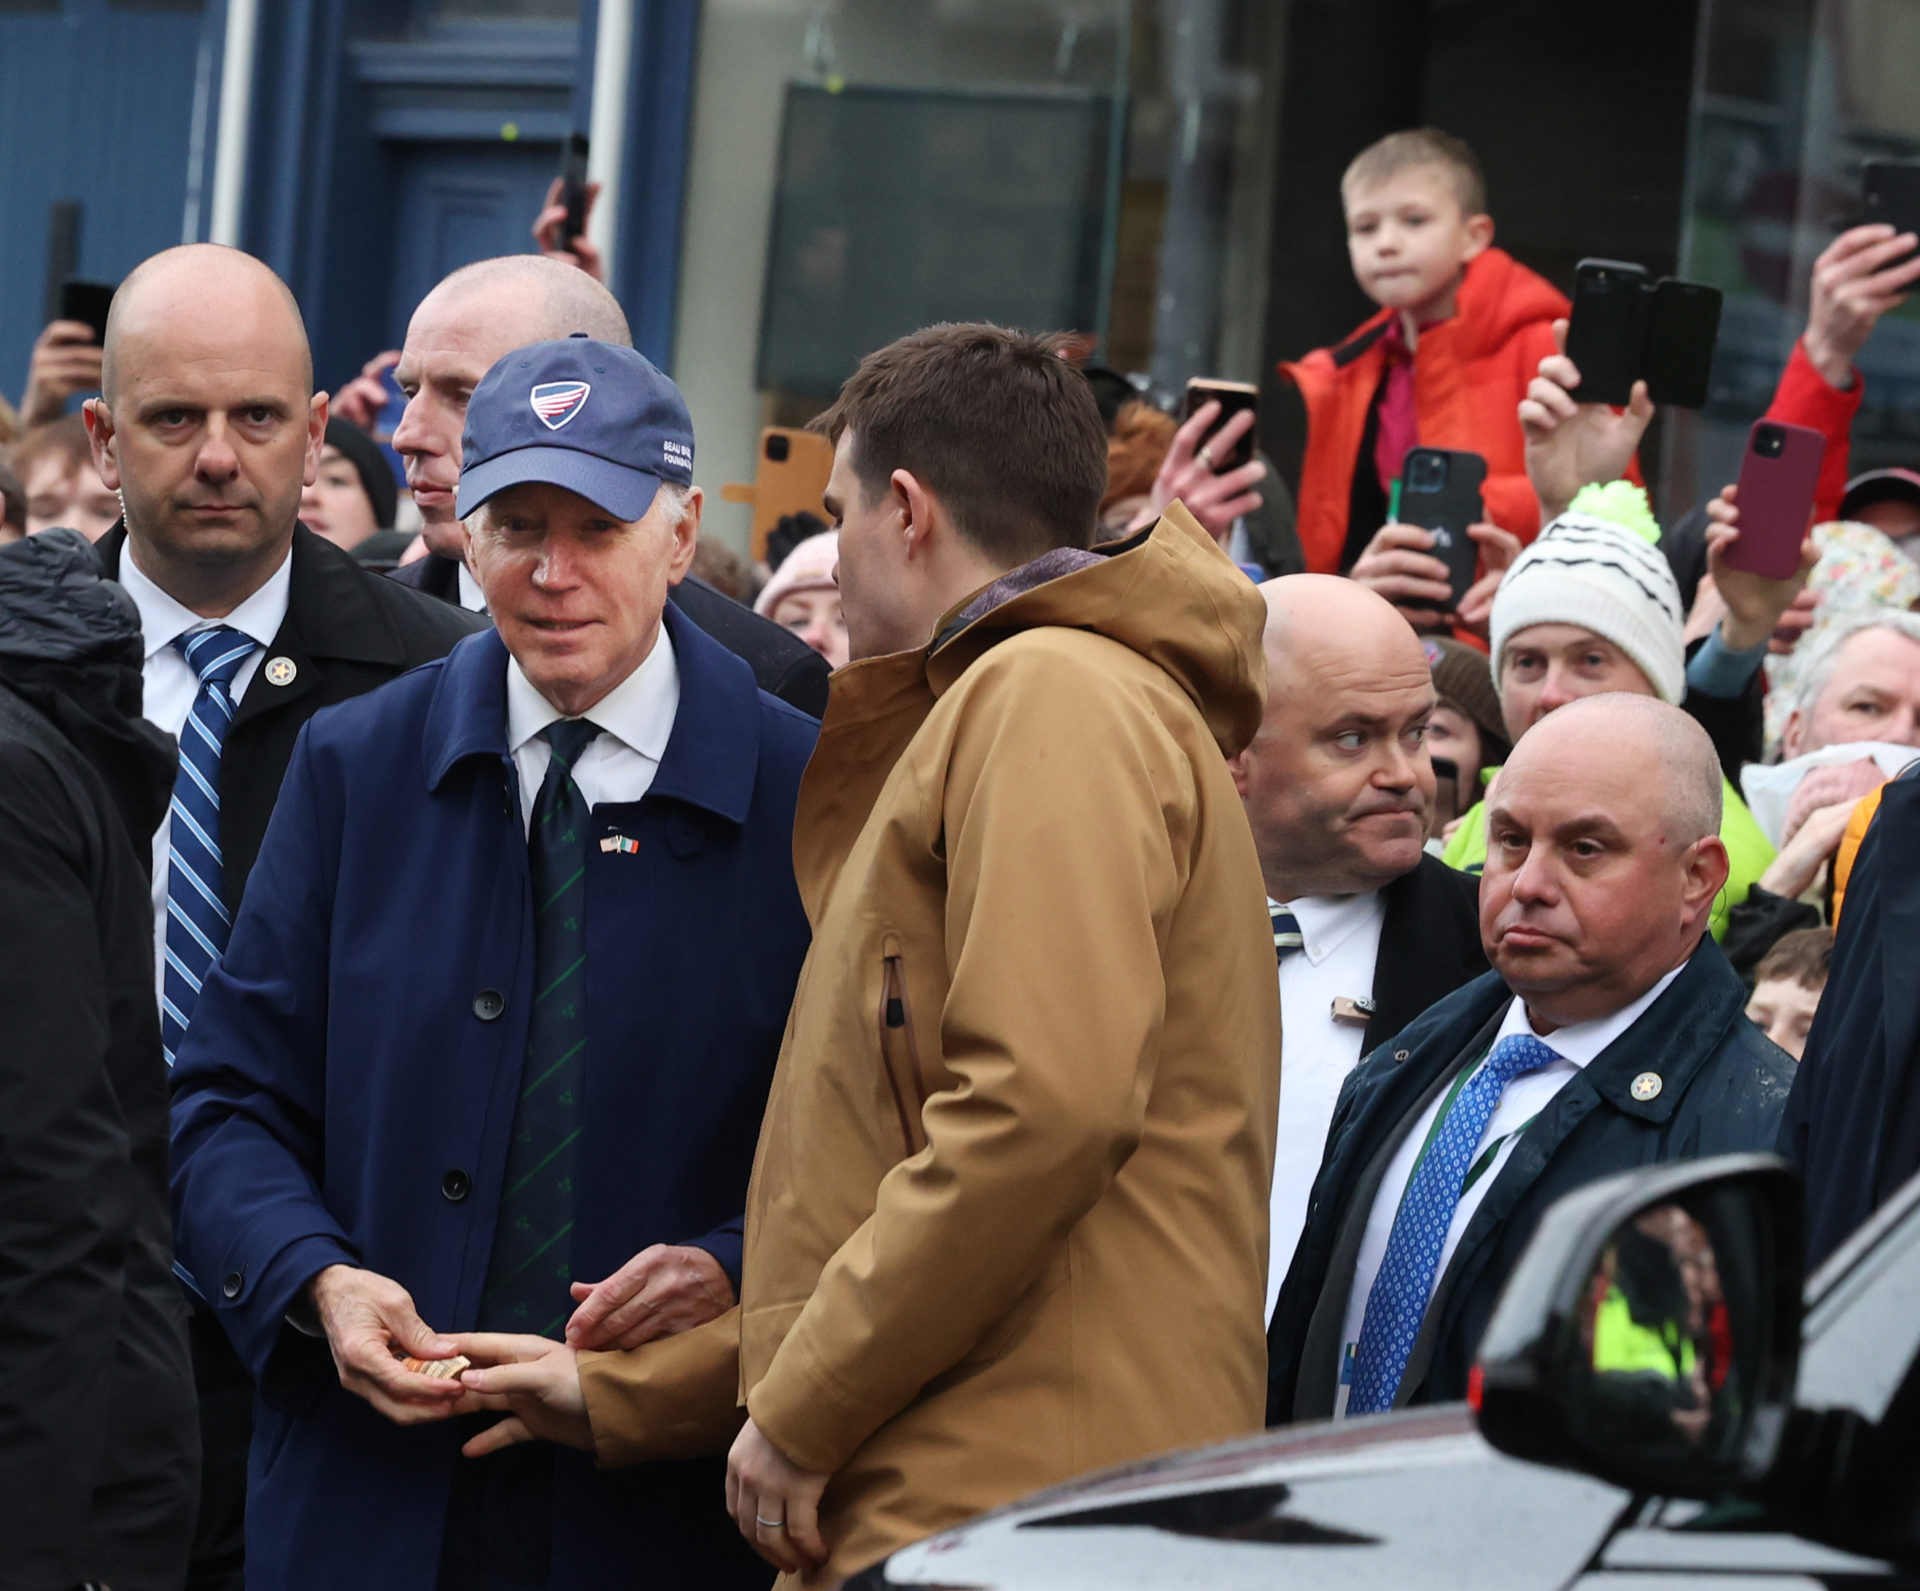 US President Joe Biden is surrounded by Secret Service officers during his visit to Dundalk